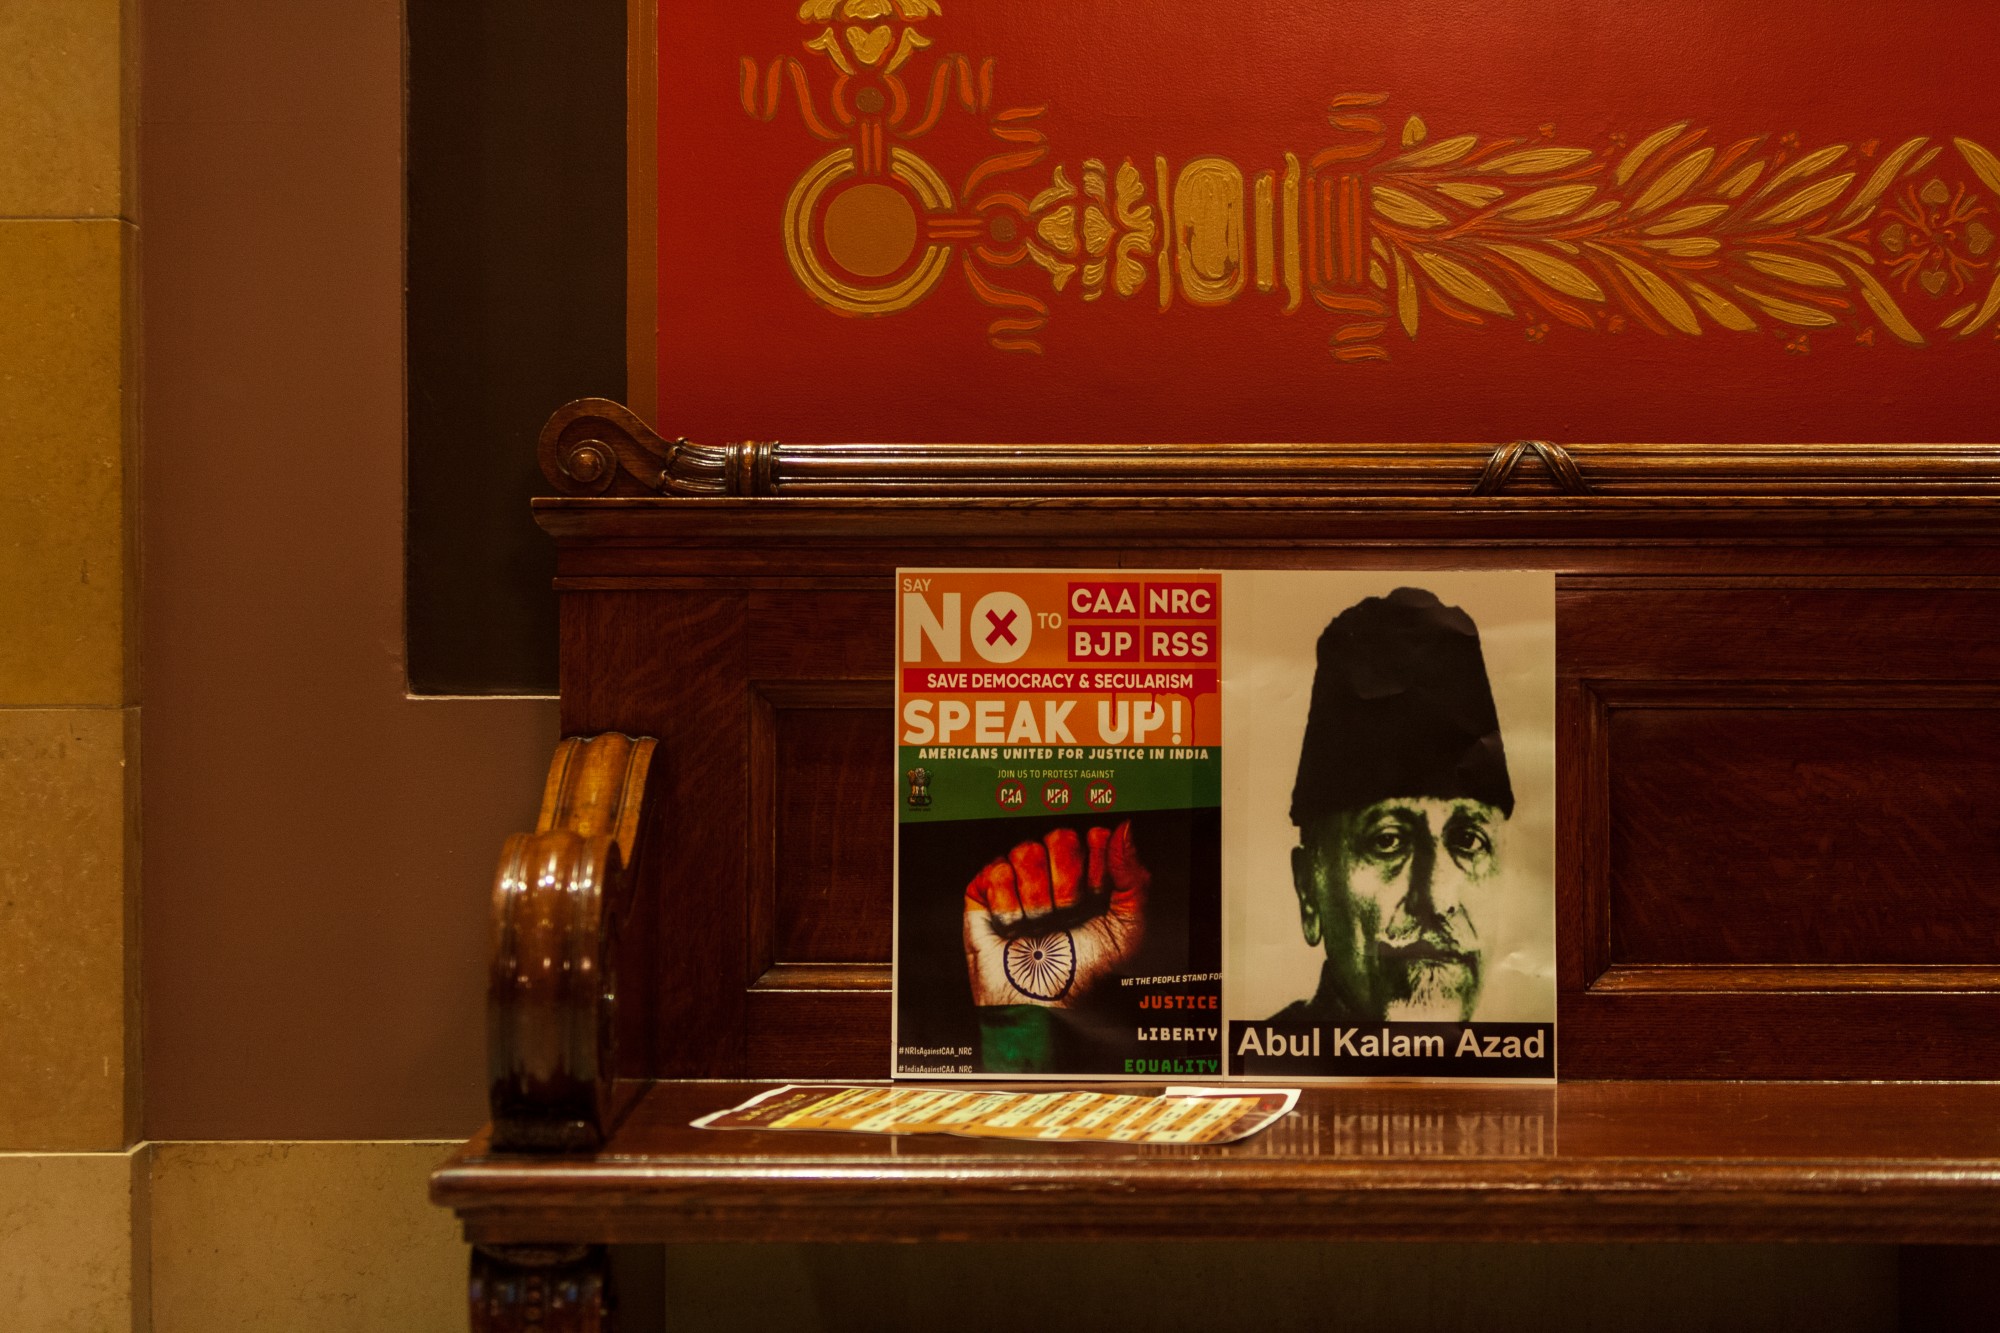 A protest sign sits unattended at an event opposing Indias recent passage of the Citizenship Amendment Act at the Minnesota State Capitol Building on Sunday, Jan. 26. This legislation offers Indian citizenship to refugees of several religious groups, but does not apply to Muslims, despite their making up nearly 15% of the Indian population.